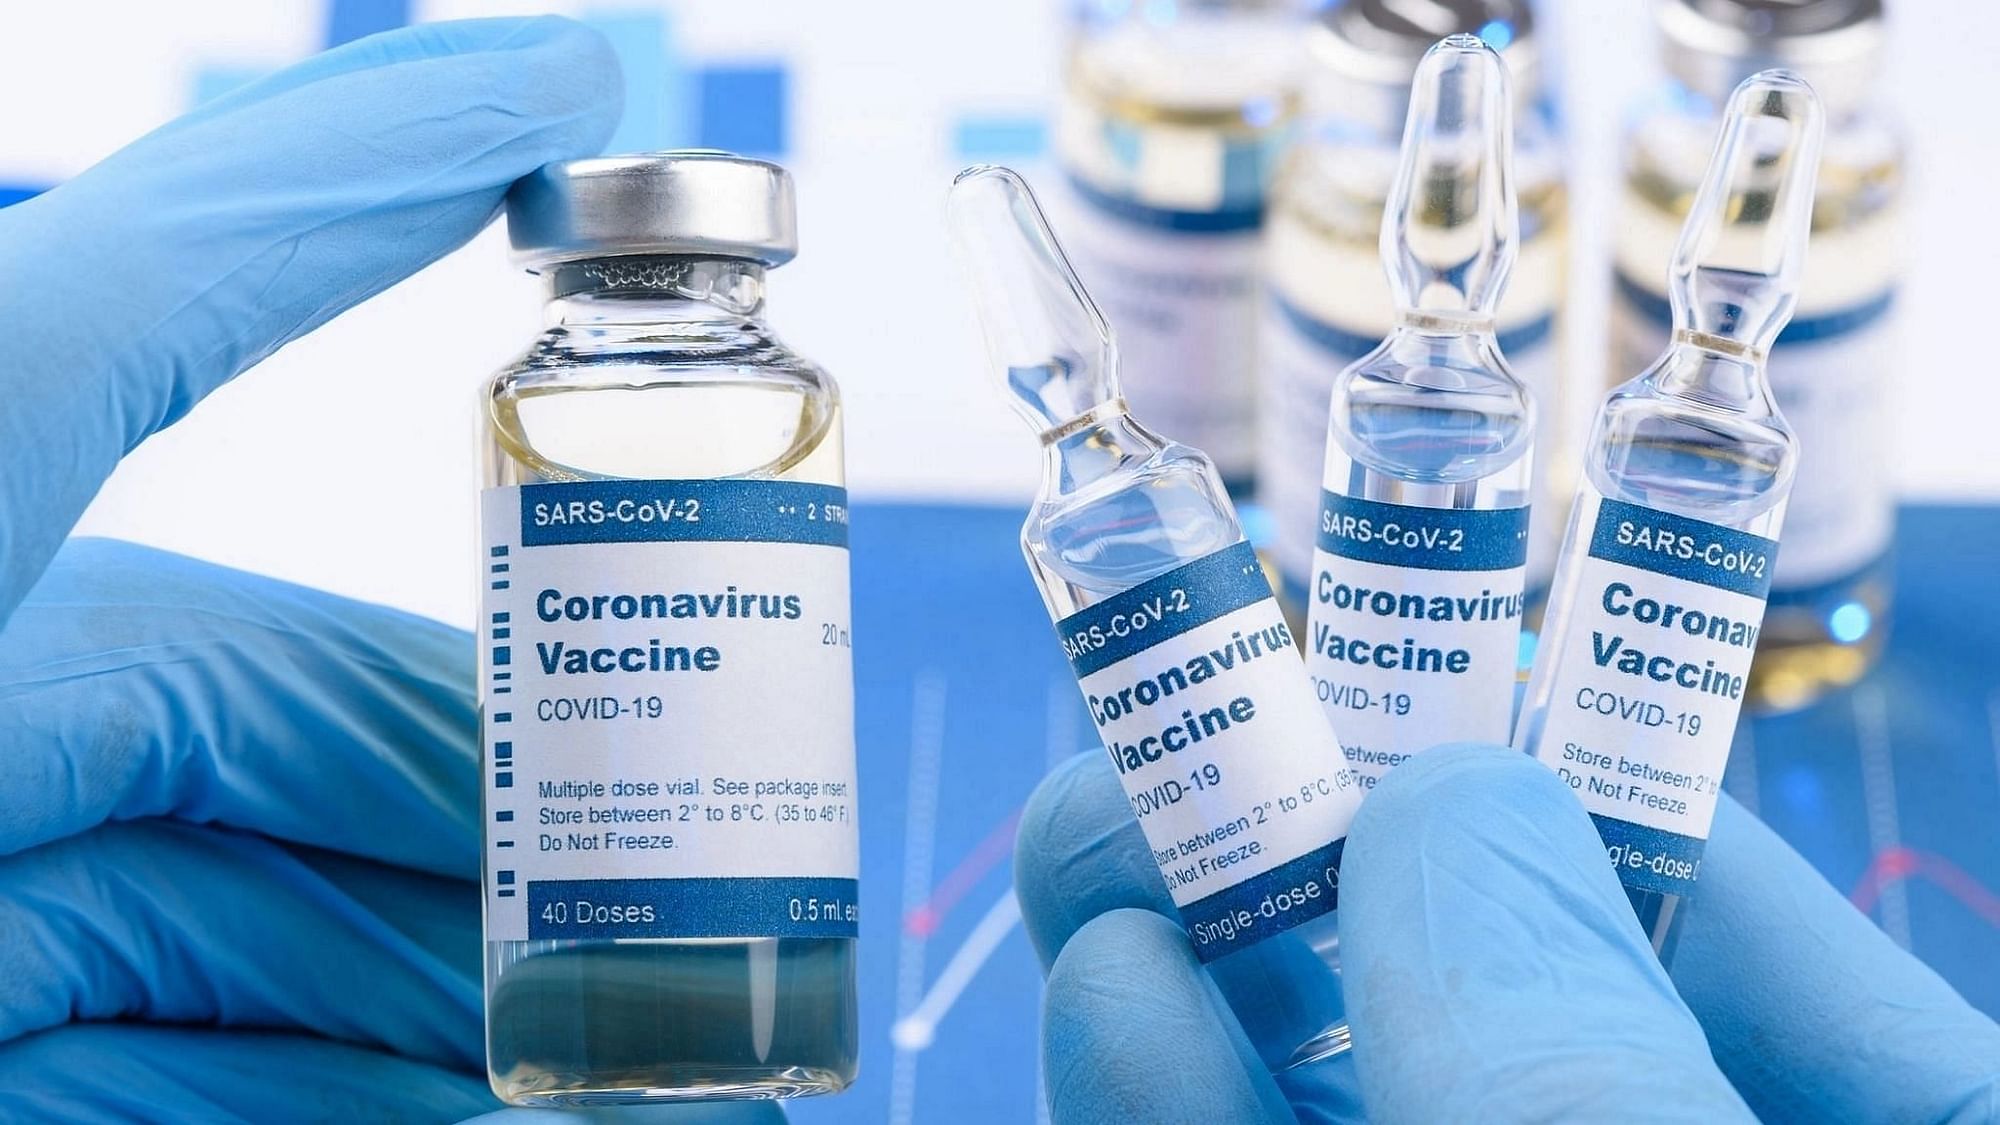 <div class="paragraphs"><p>India began administering the COVID-19 vaccine 'precaution dose' to healthcare workers, frontline workers, and people aged 60 and above with comorbidities from Monday, 10 January. Image used for representational purpose.</p></div>